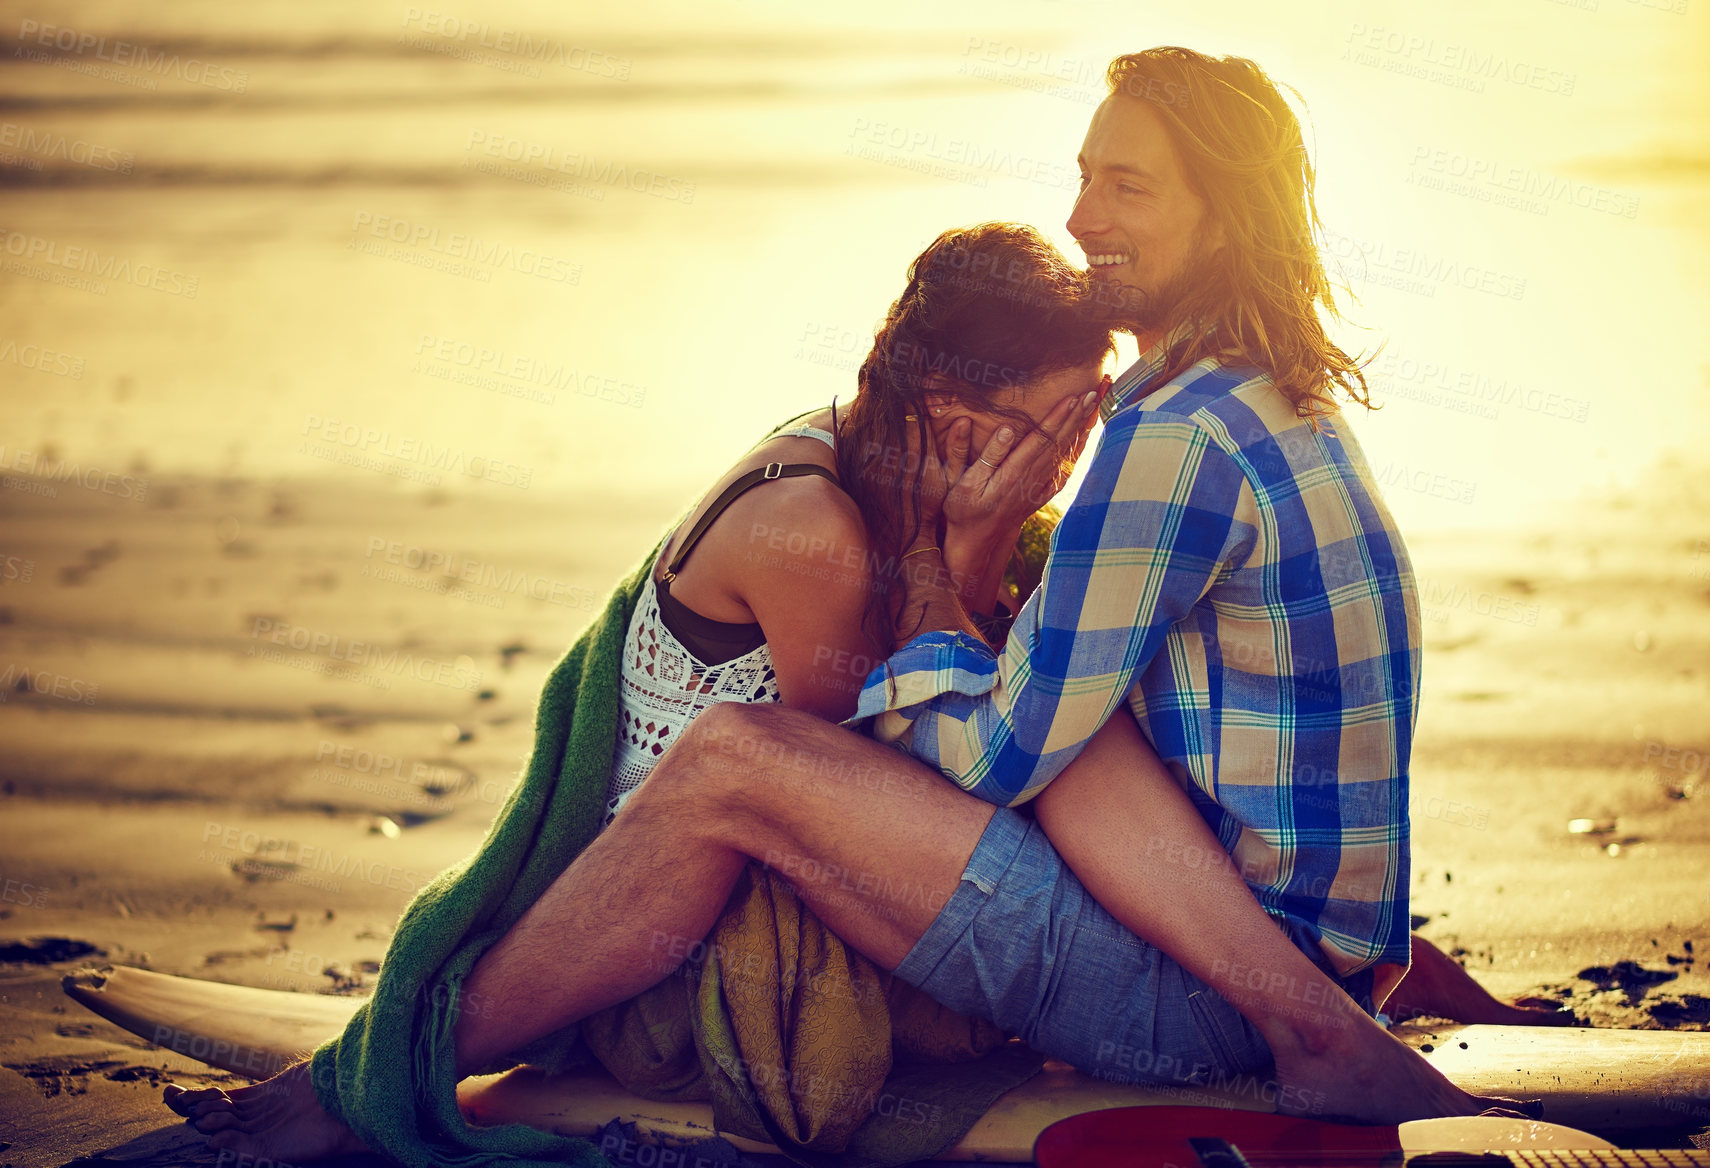 Buy stock photo Shot of a couple sitting on the beach with their legs intertwined